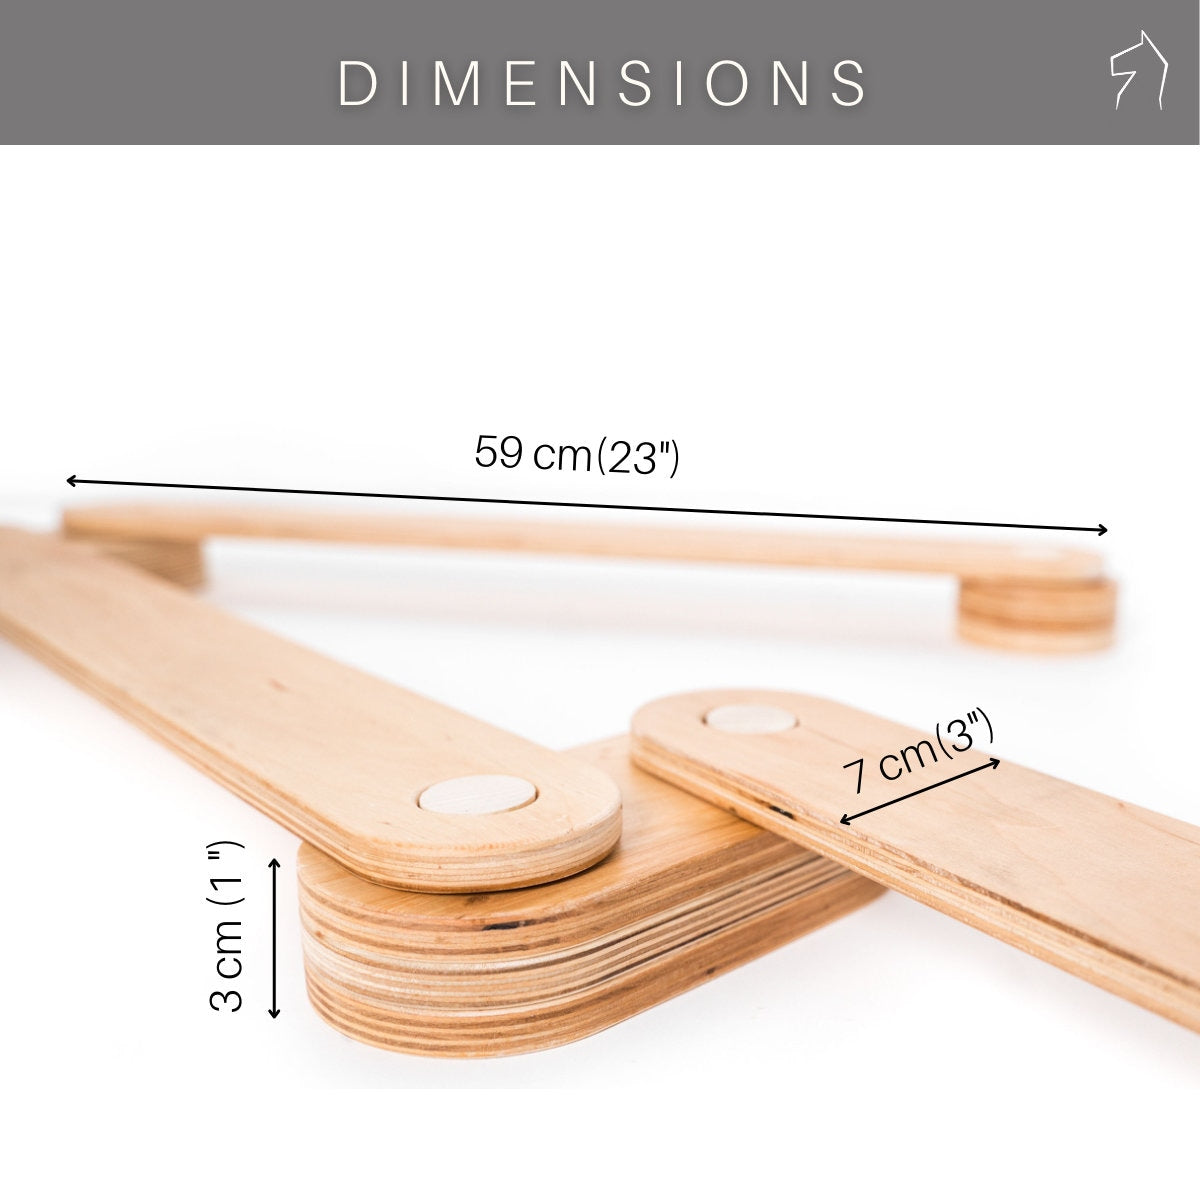 Wooden balance beam for children with text showing dimensions